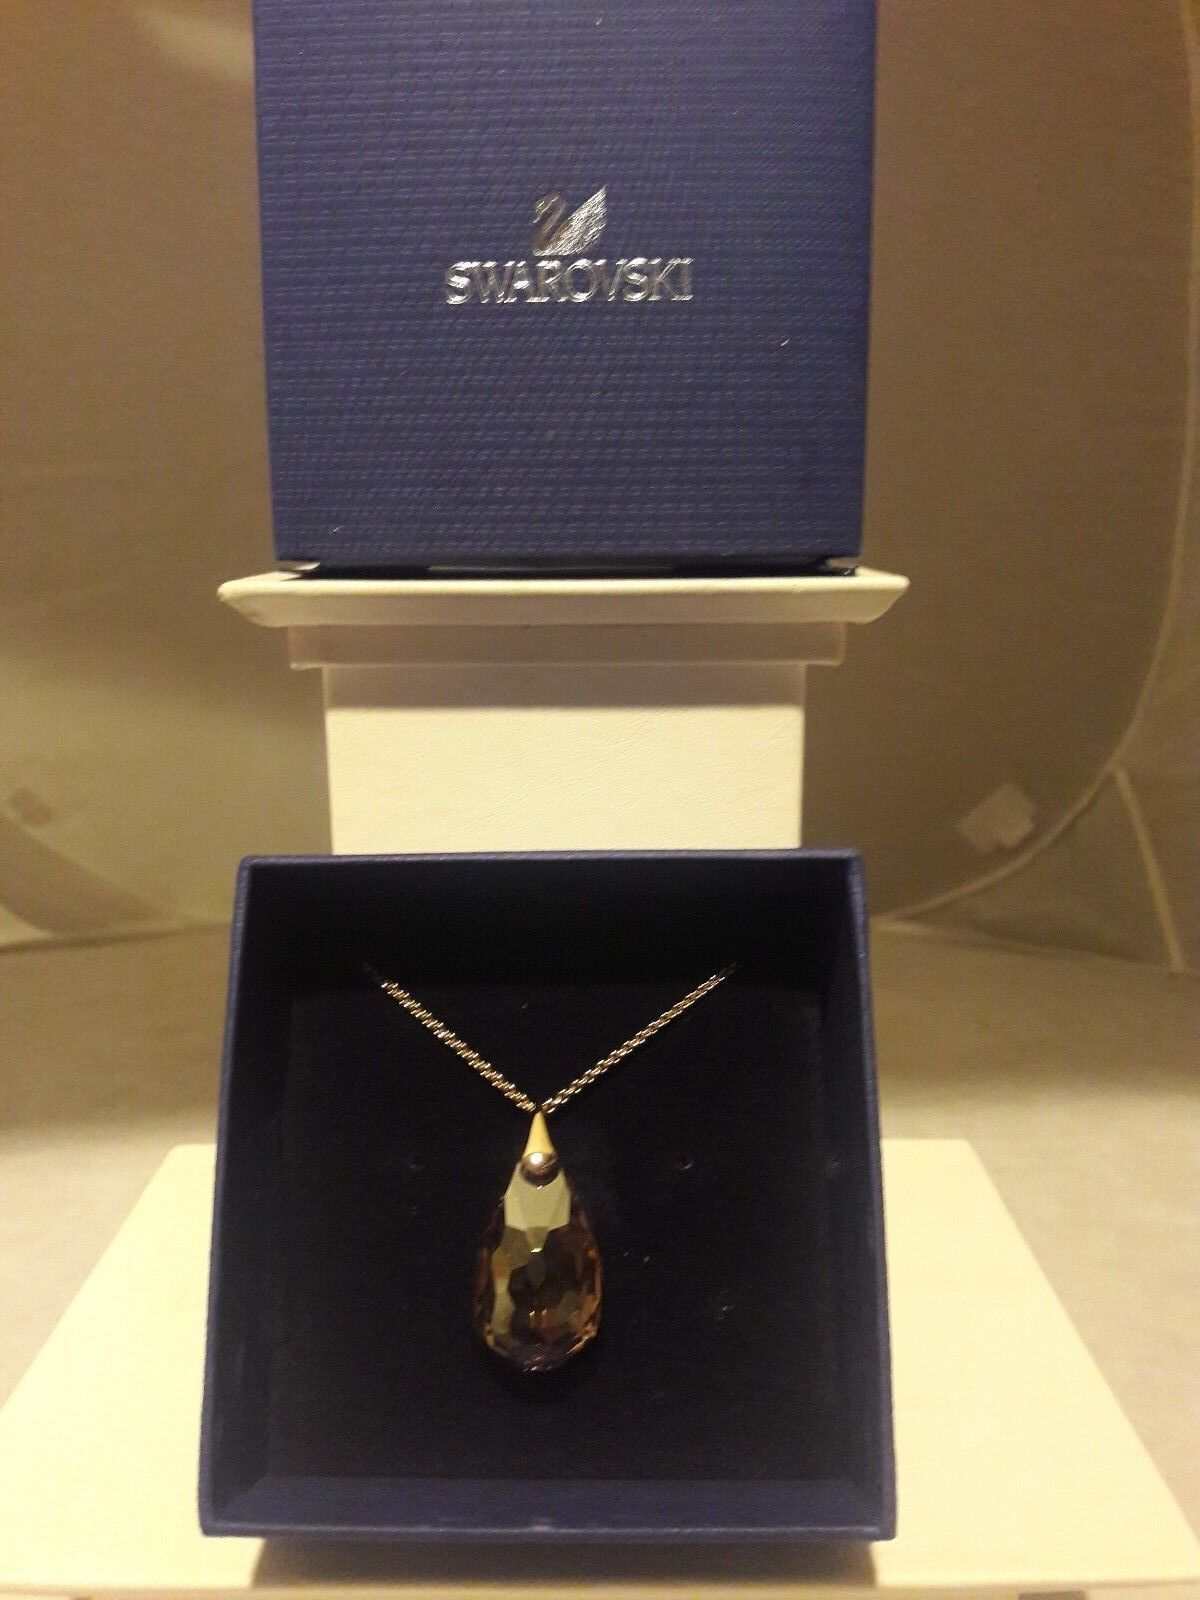 SWAROVSKI, SCS, ORO PENDANT, BRAND NEW, MINT AND BOXED, FREE USPS SHIPPING